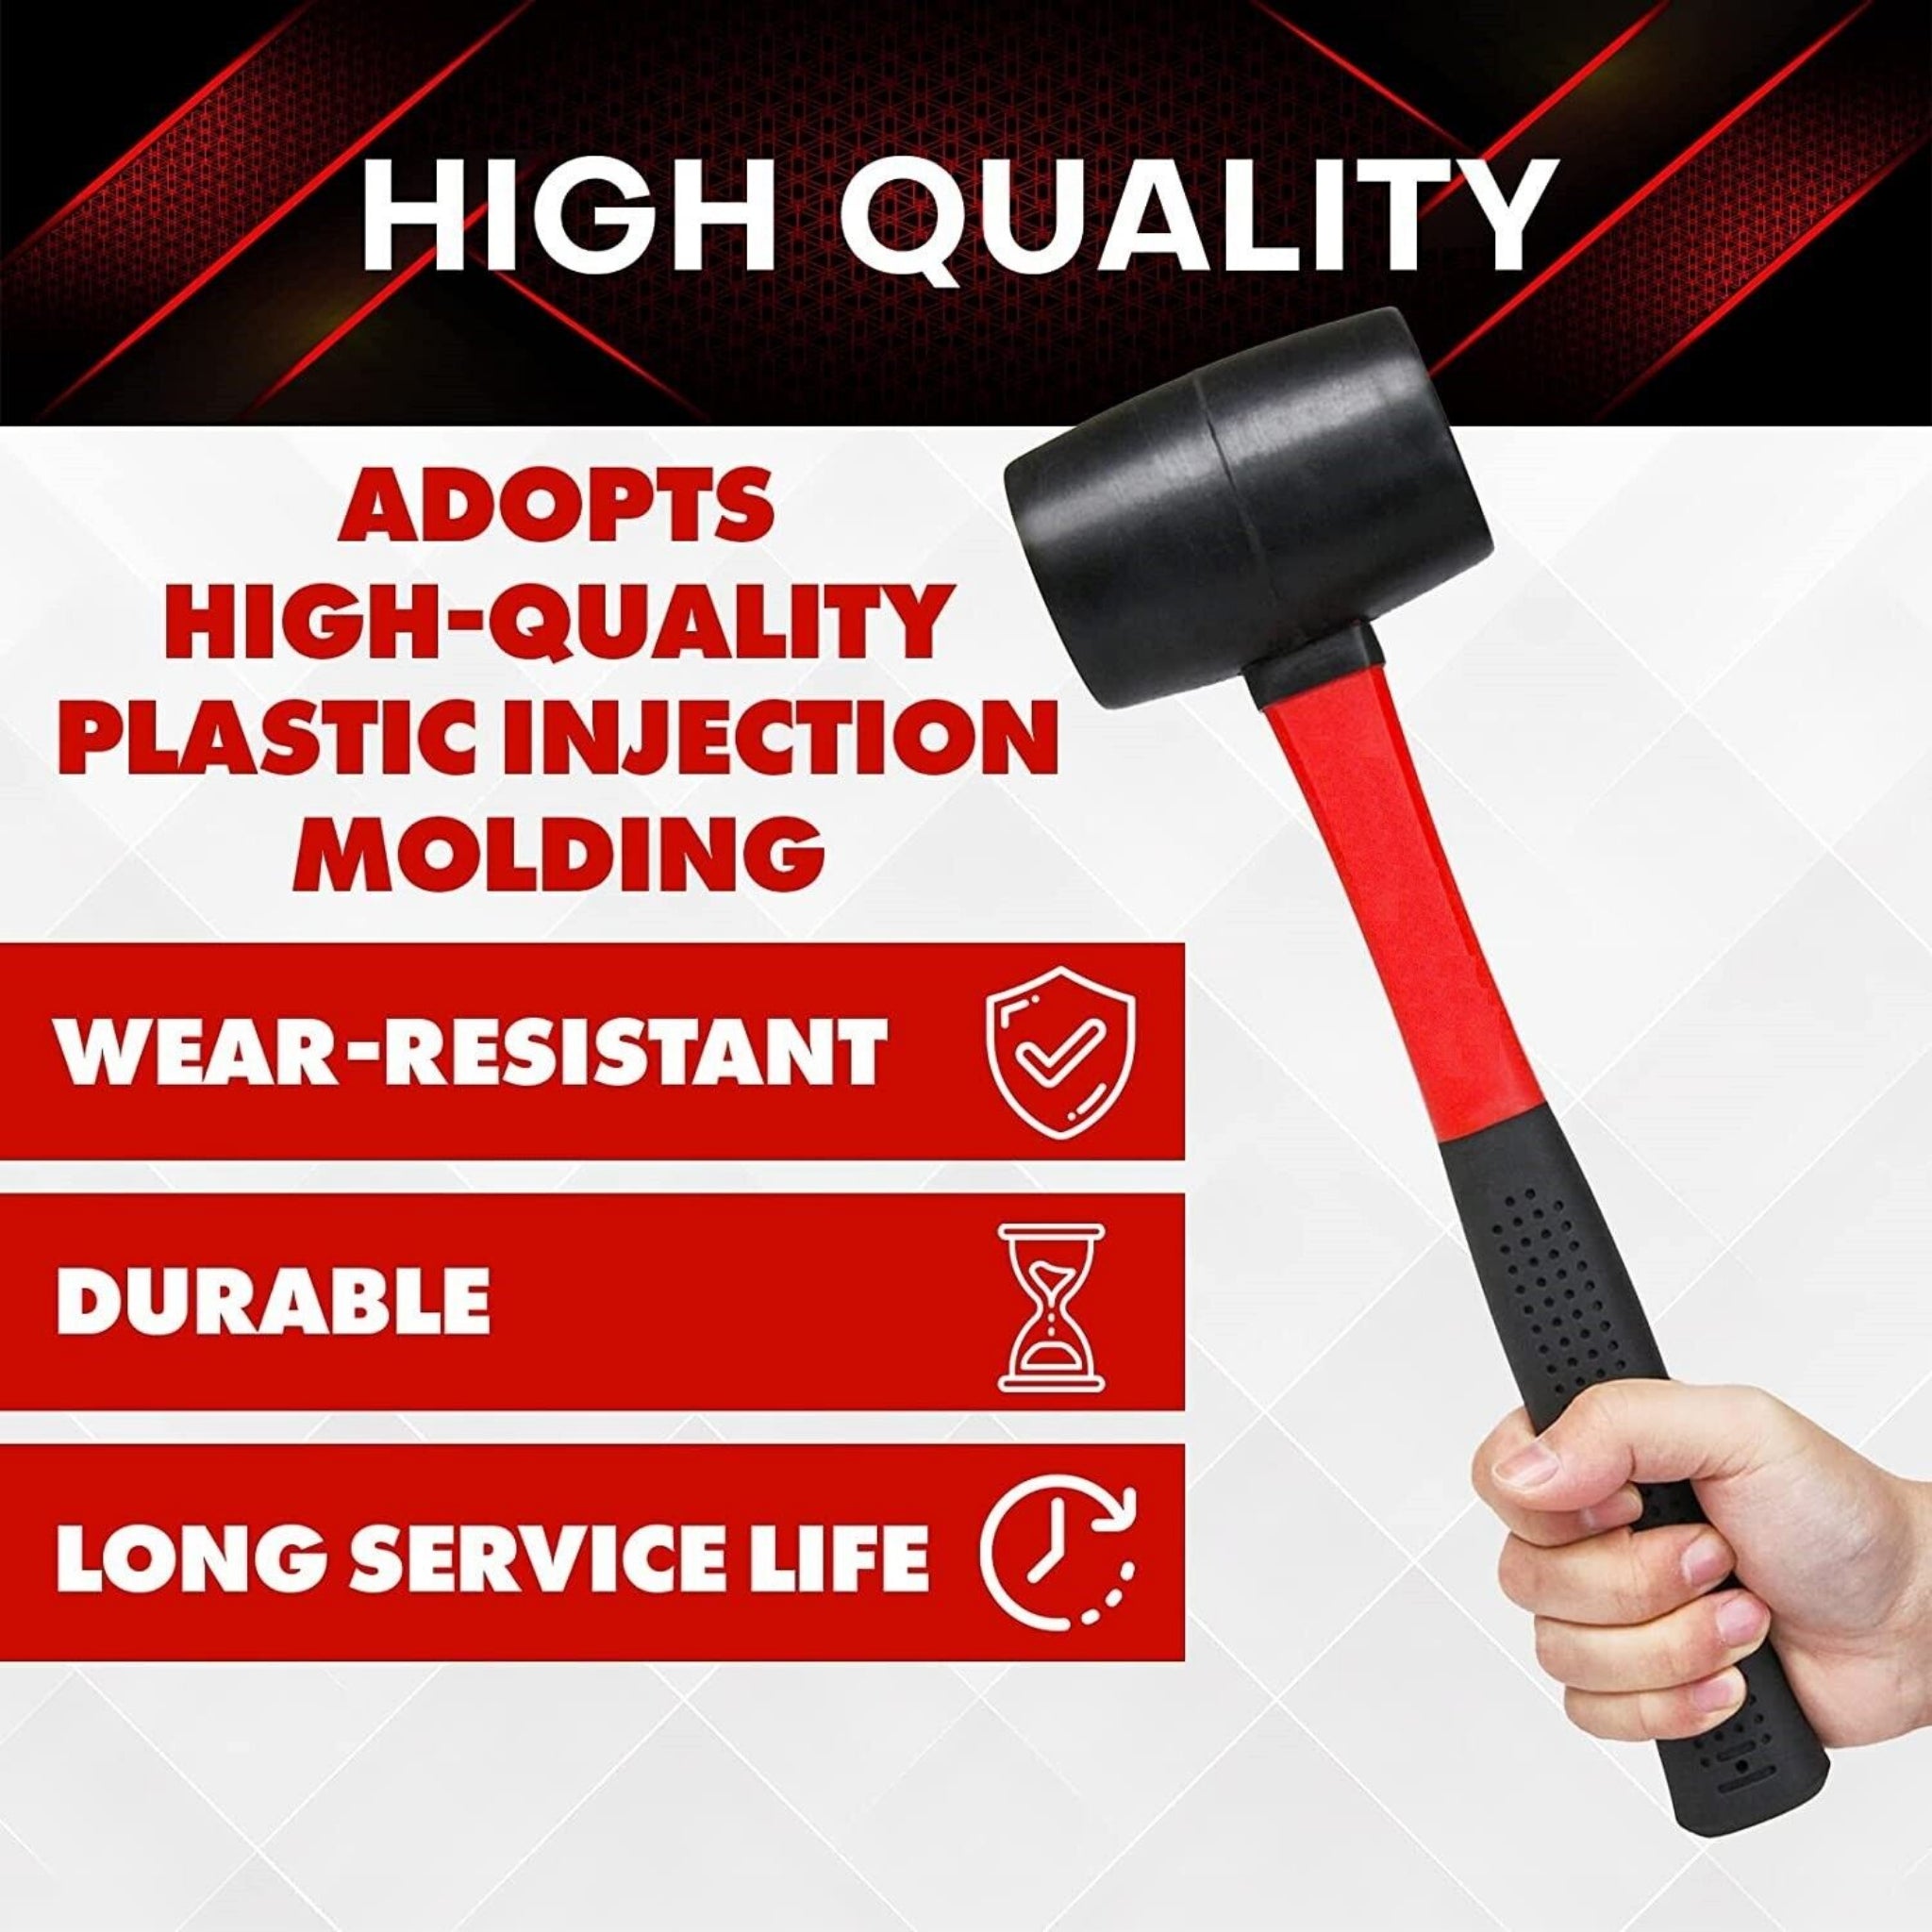 Beclen Harp 16oz Rubber Mallet Shaft Grip Handle Fiberglass Hammer- Perfect DIY Tool For Camping And Paving